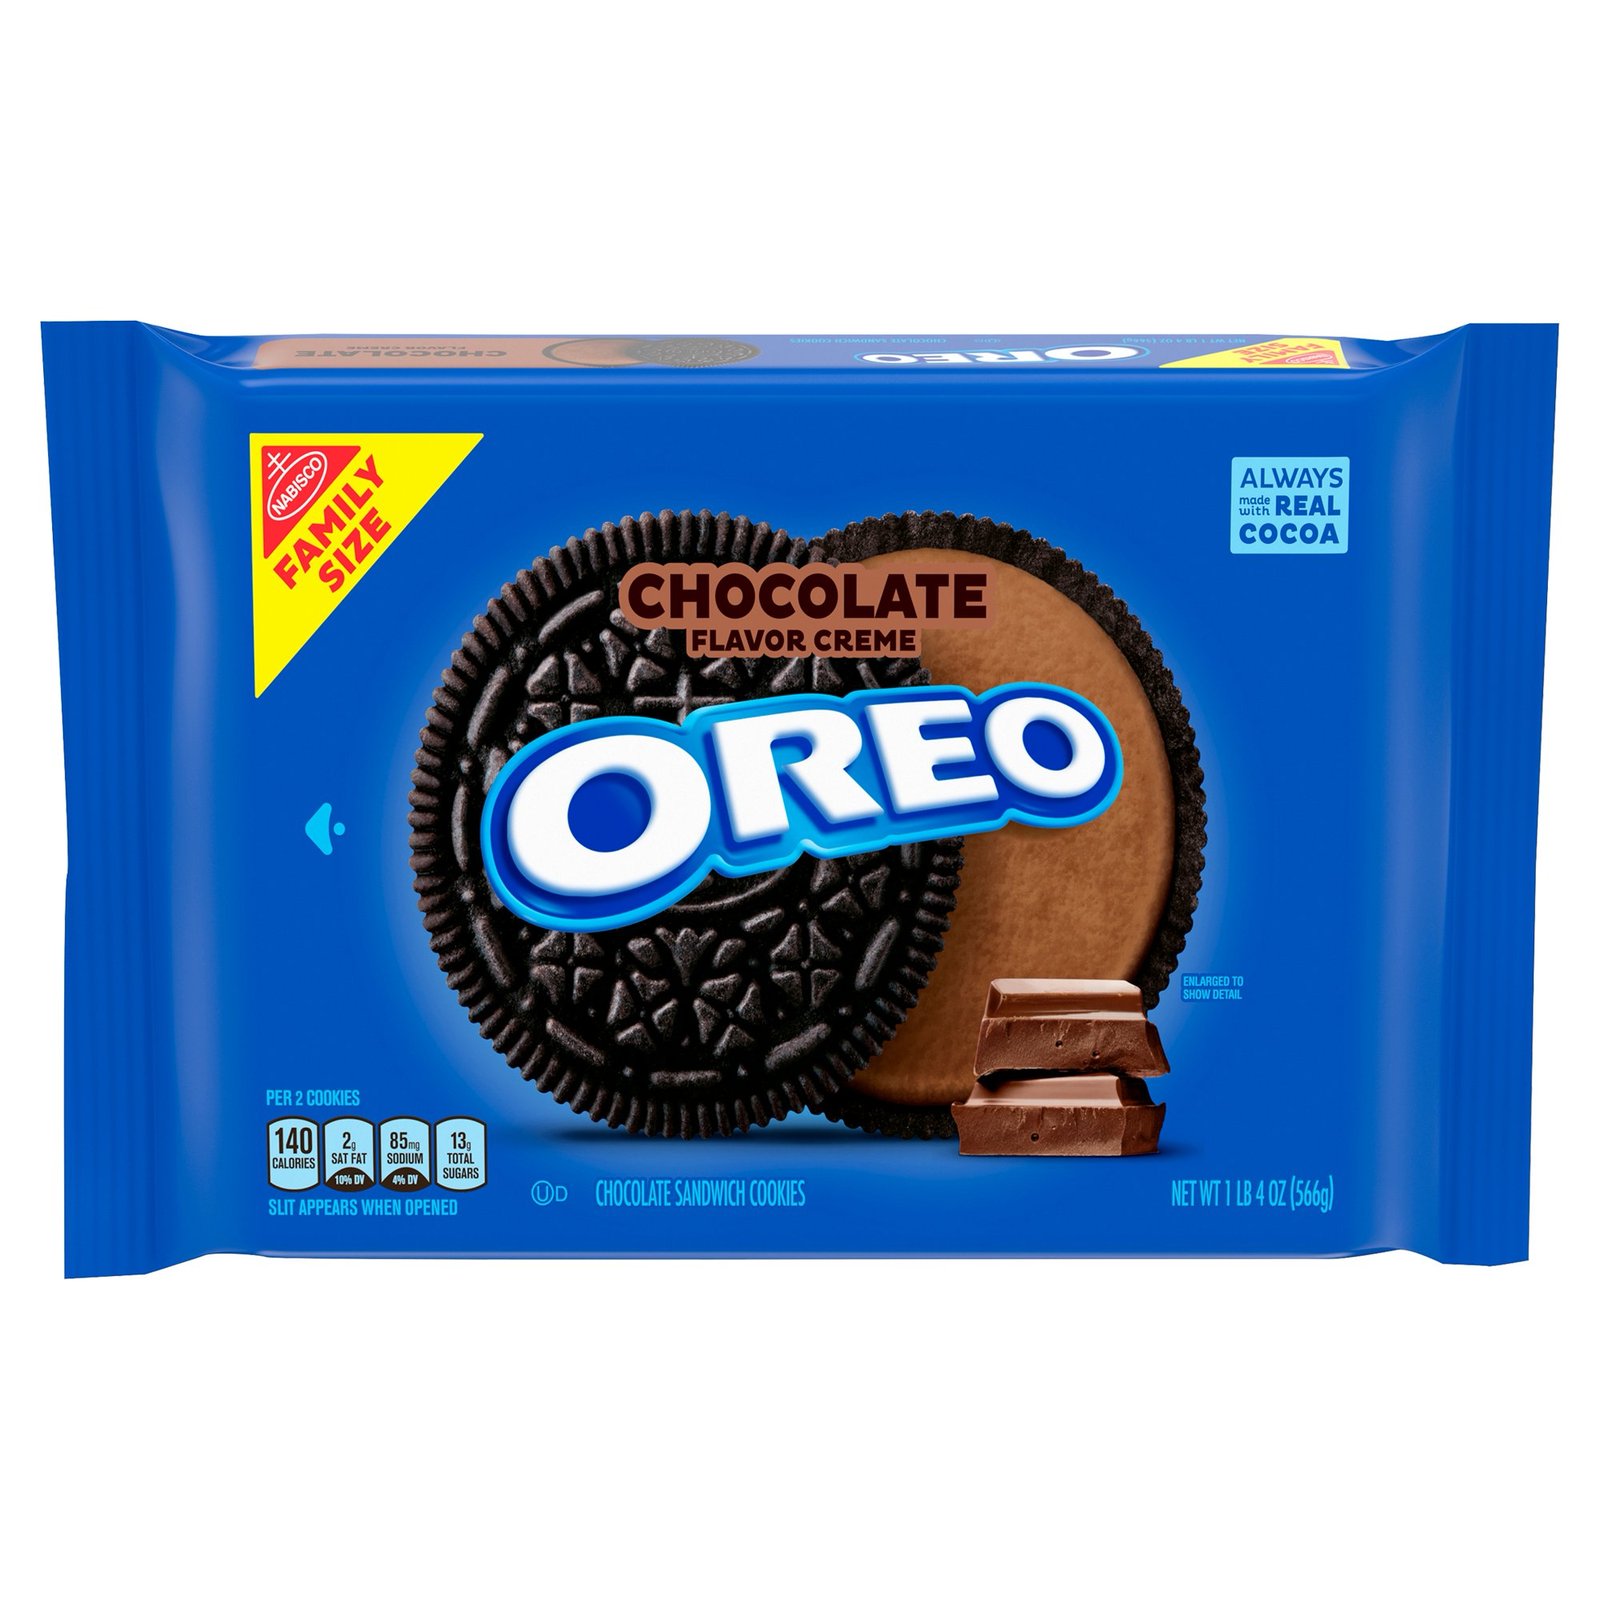 OREO Chocolate Flavored Creme Chocolate Sandwich Cookies Family Size Pack 17 oz.